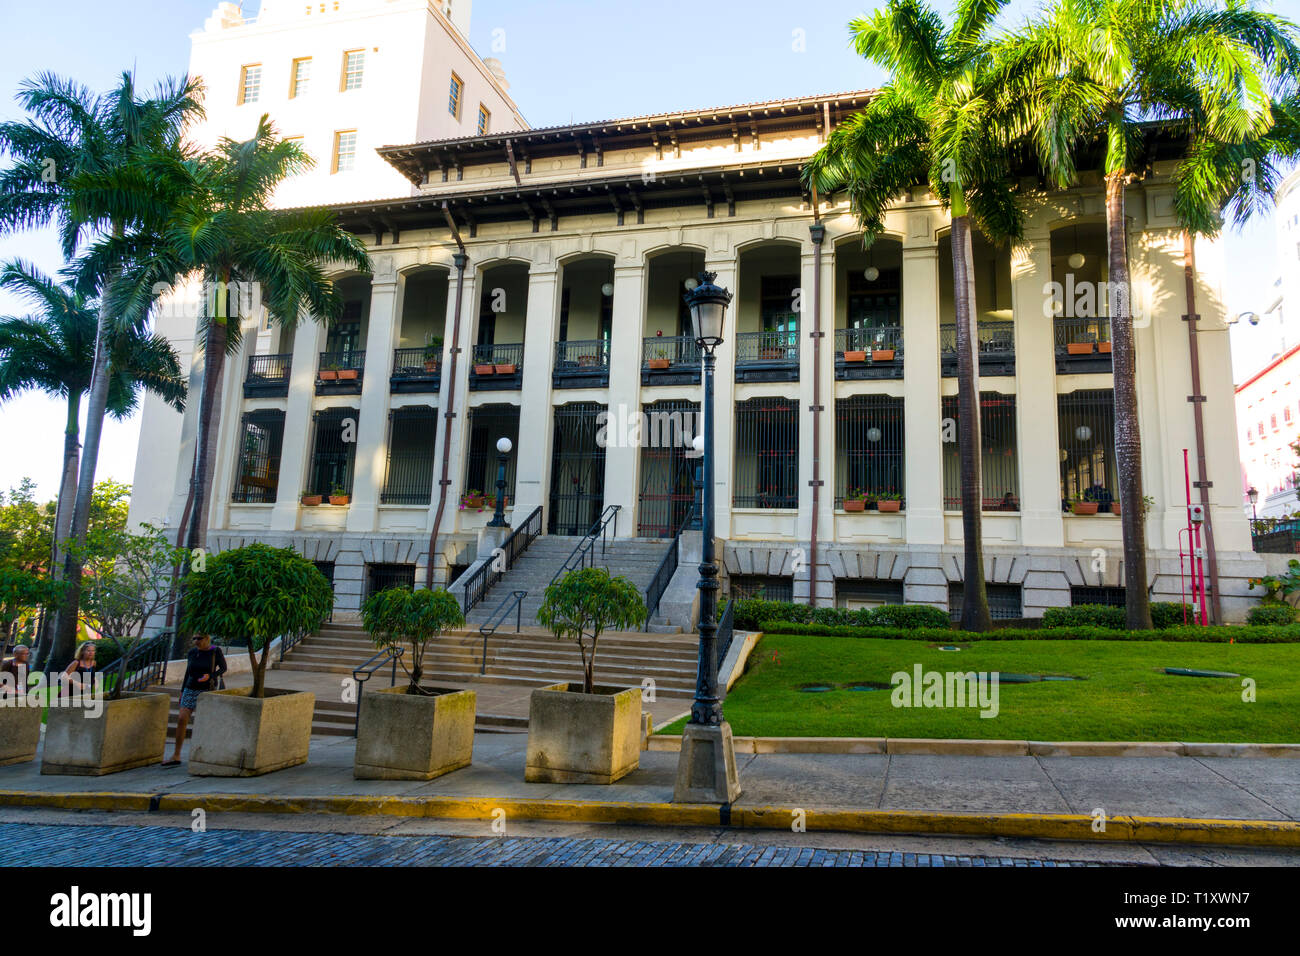 Post Office building at San Juan, Puerto Rico s capital and largest city, sits on the island's Atlantic coast. Its widest beach fronts the Isla Verde Stock Photo